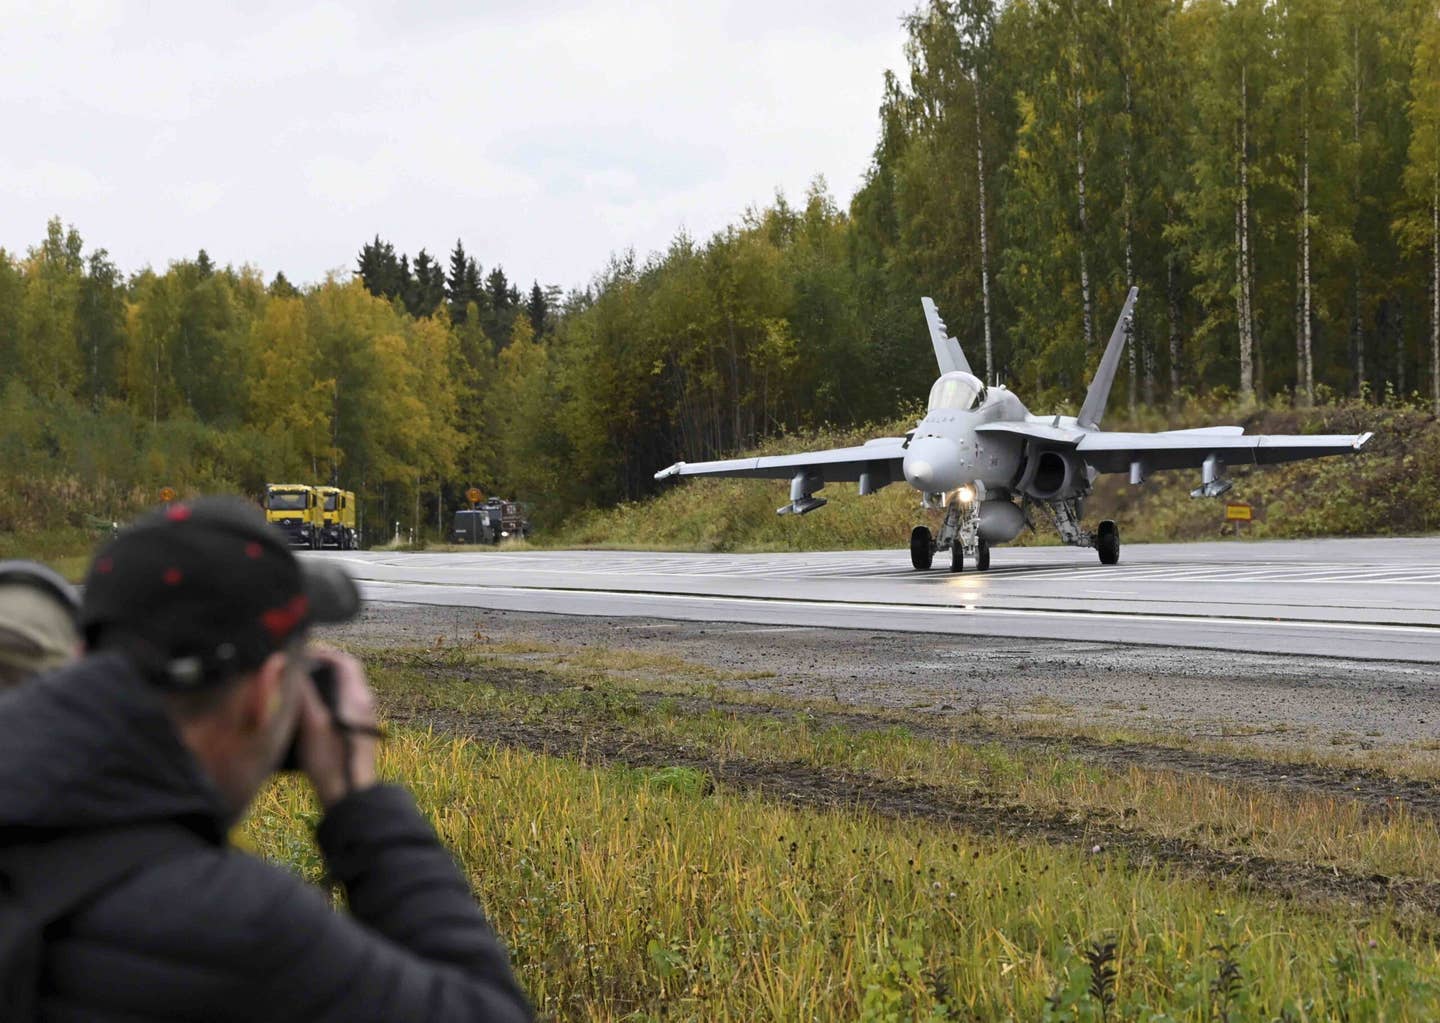 A Finnish Air Force F/A-18 Hornet gets ready to take off from the E4 Highway in Joutsa, Central Finland during the Baana 2022 training event on September 28, 2022. <em>Photo by MARKKU ULANDER/Lehtikuva/AFP via Getty Images</em>